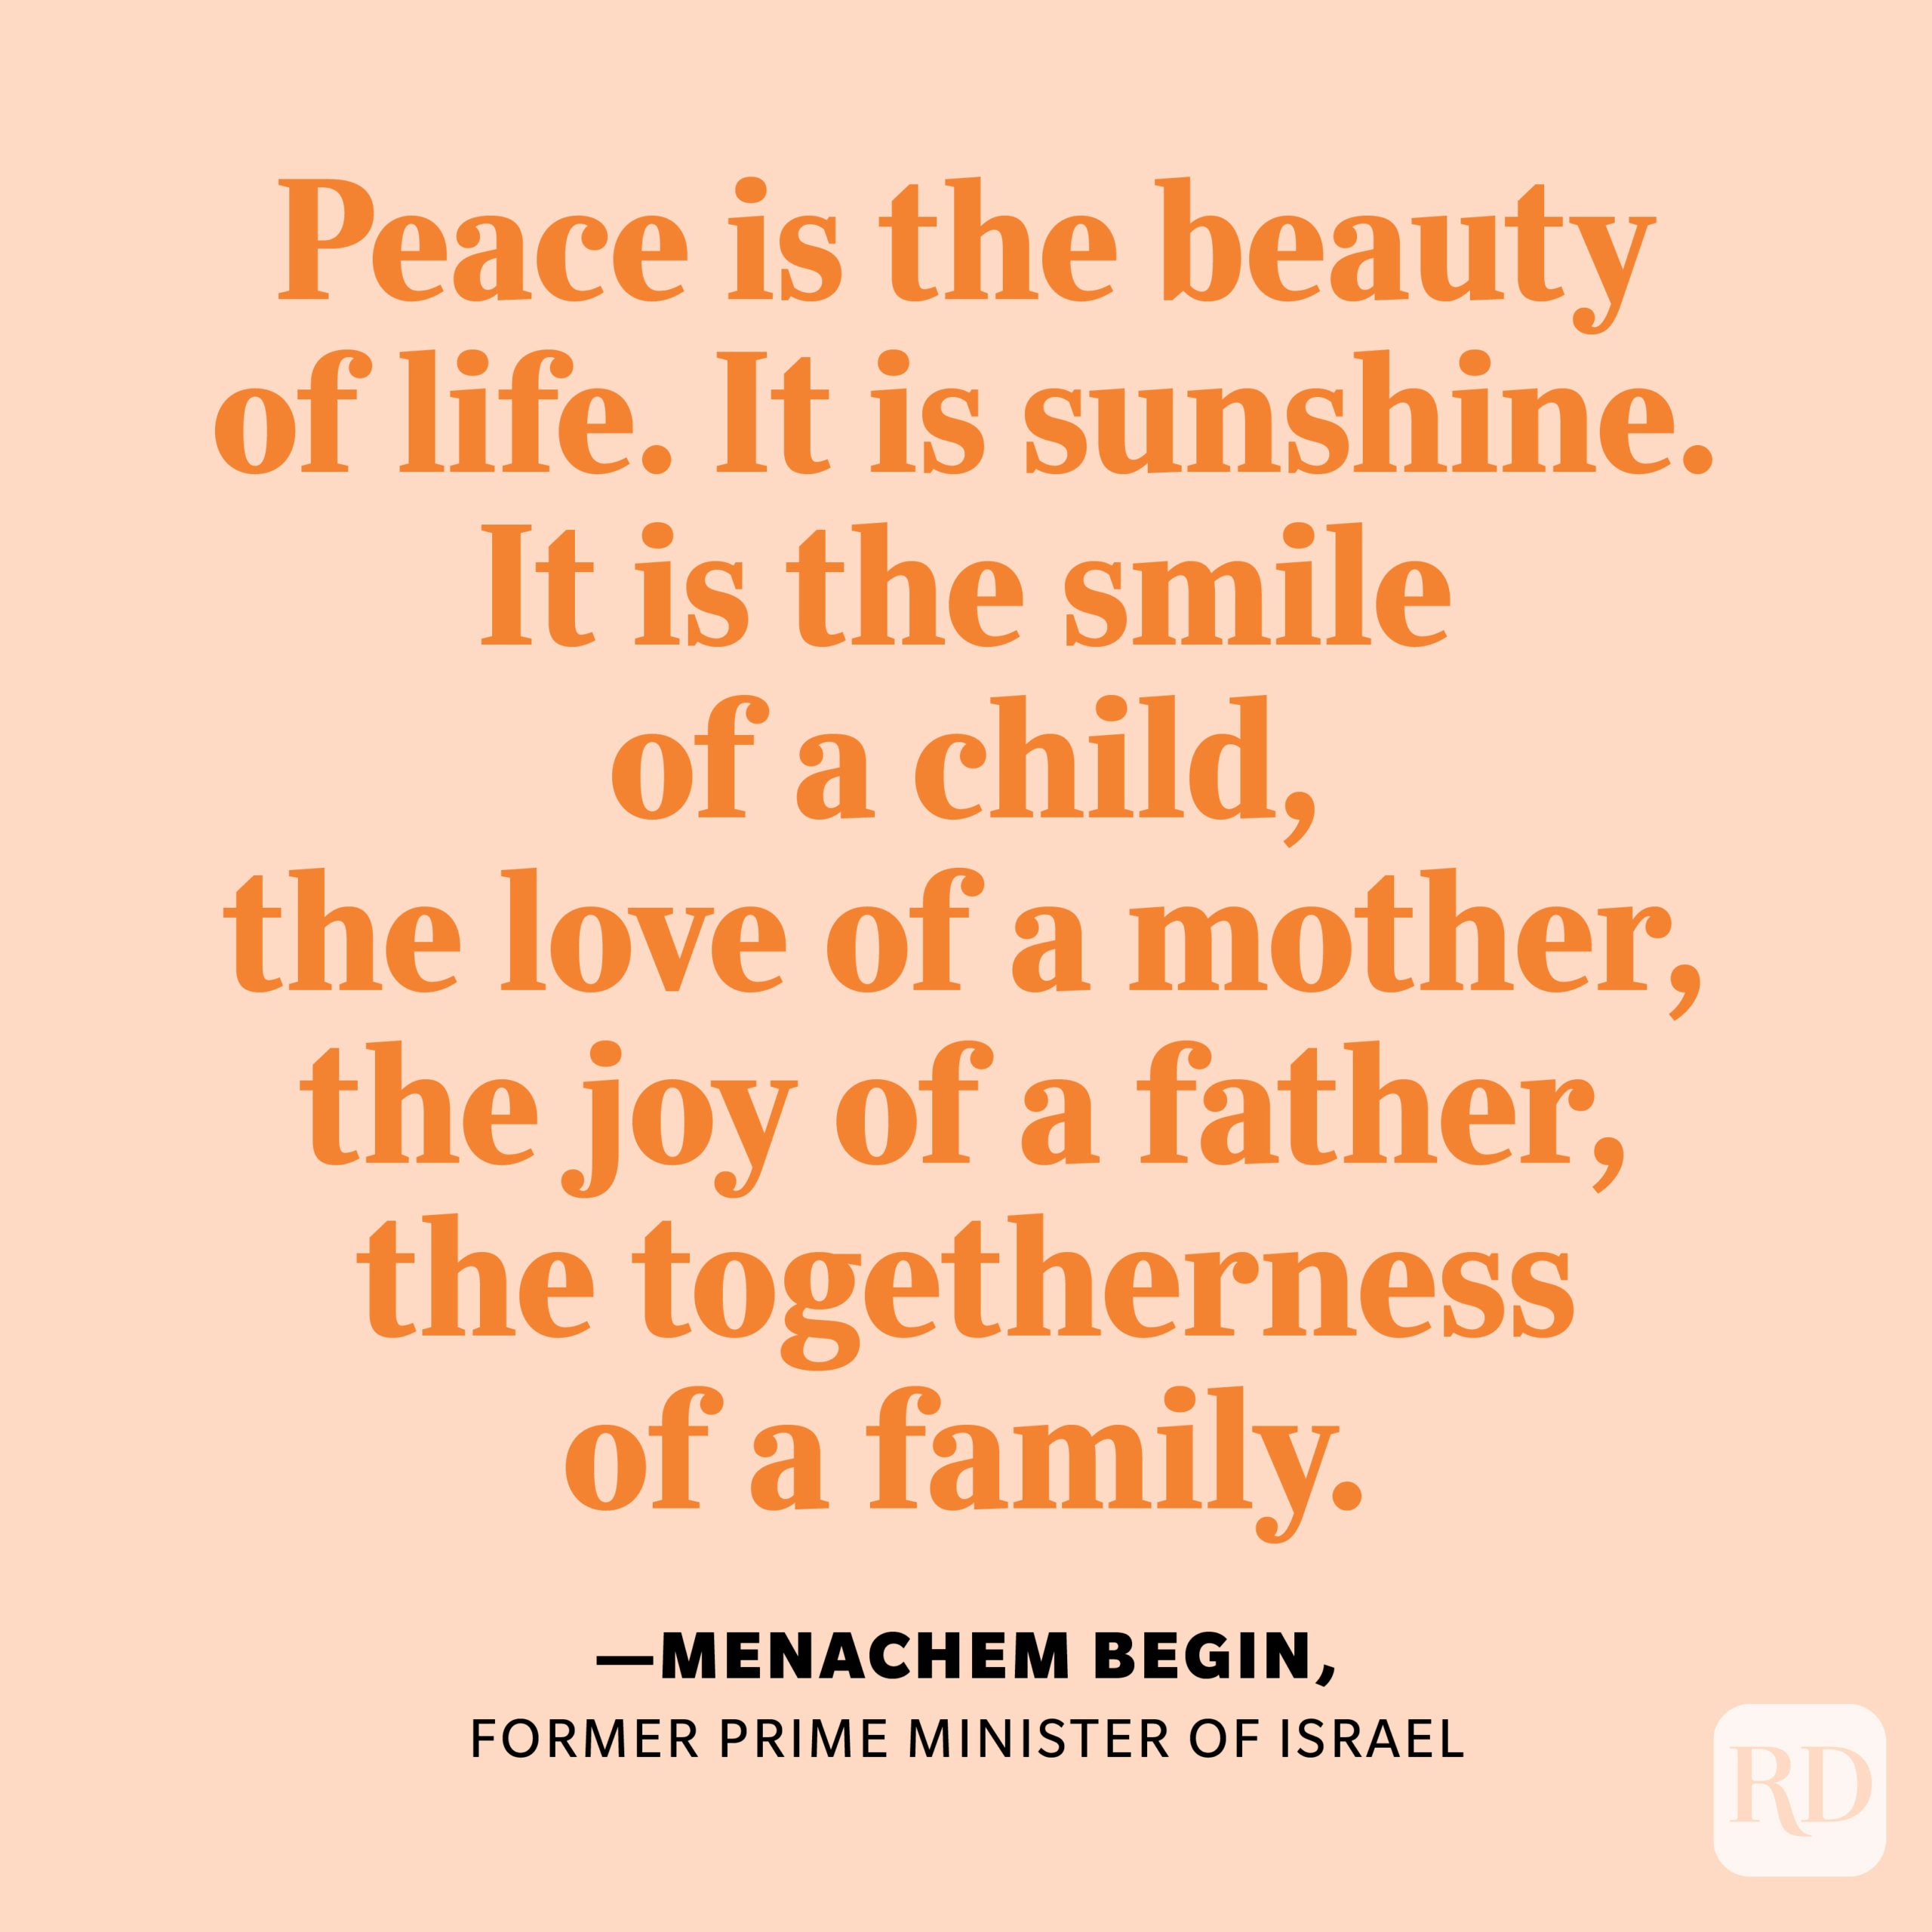 "Peace is the beauty of life. It is sunshine. It is the smile of a child, the love of a mother, the joy of a father, the togetherness of a family. It is the advancement of man, the victory of just cause, the triumph of truth." —Menachem Begin, former prime minister of Israel